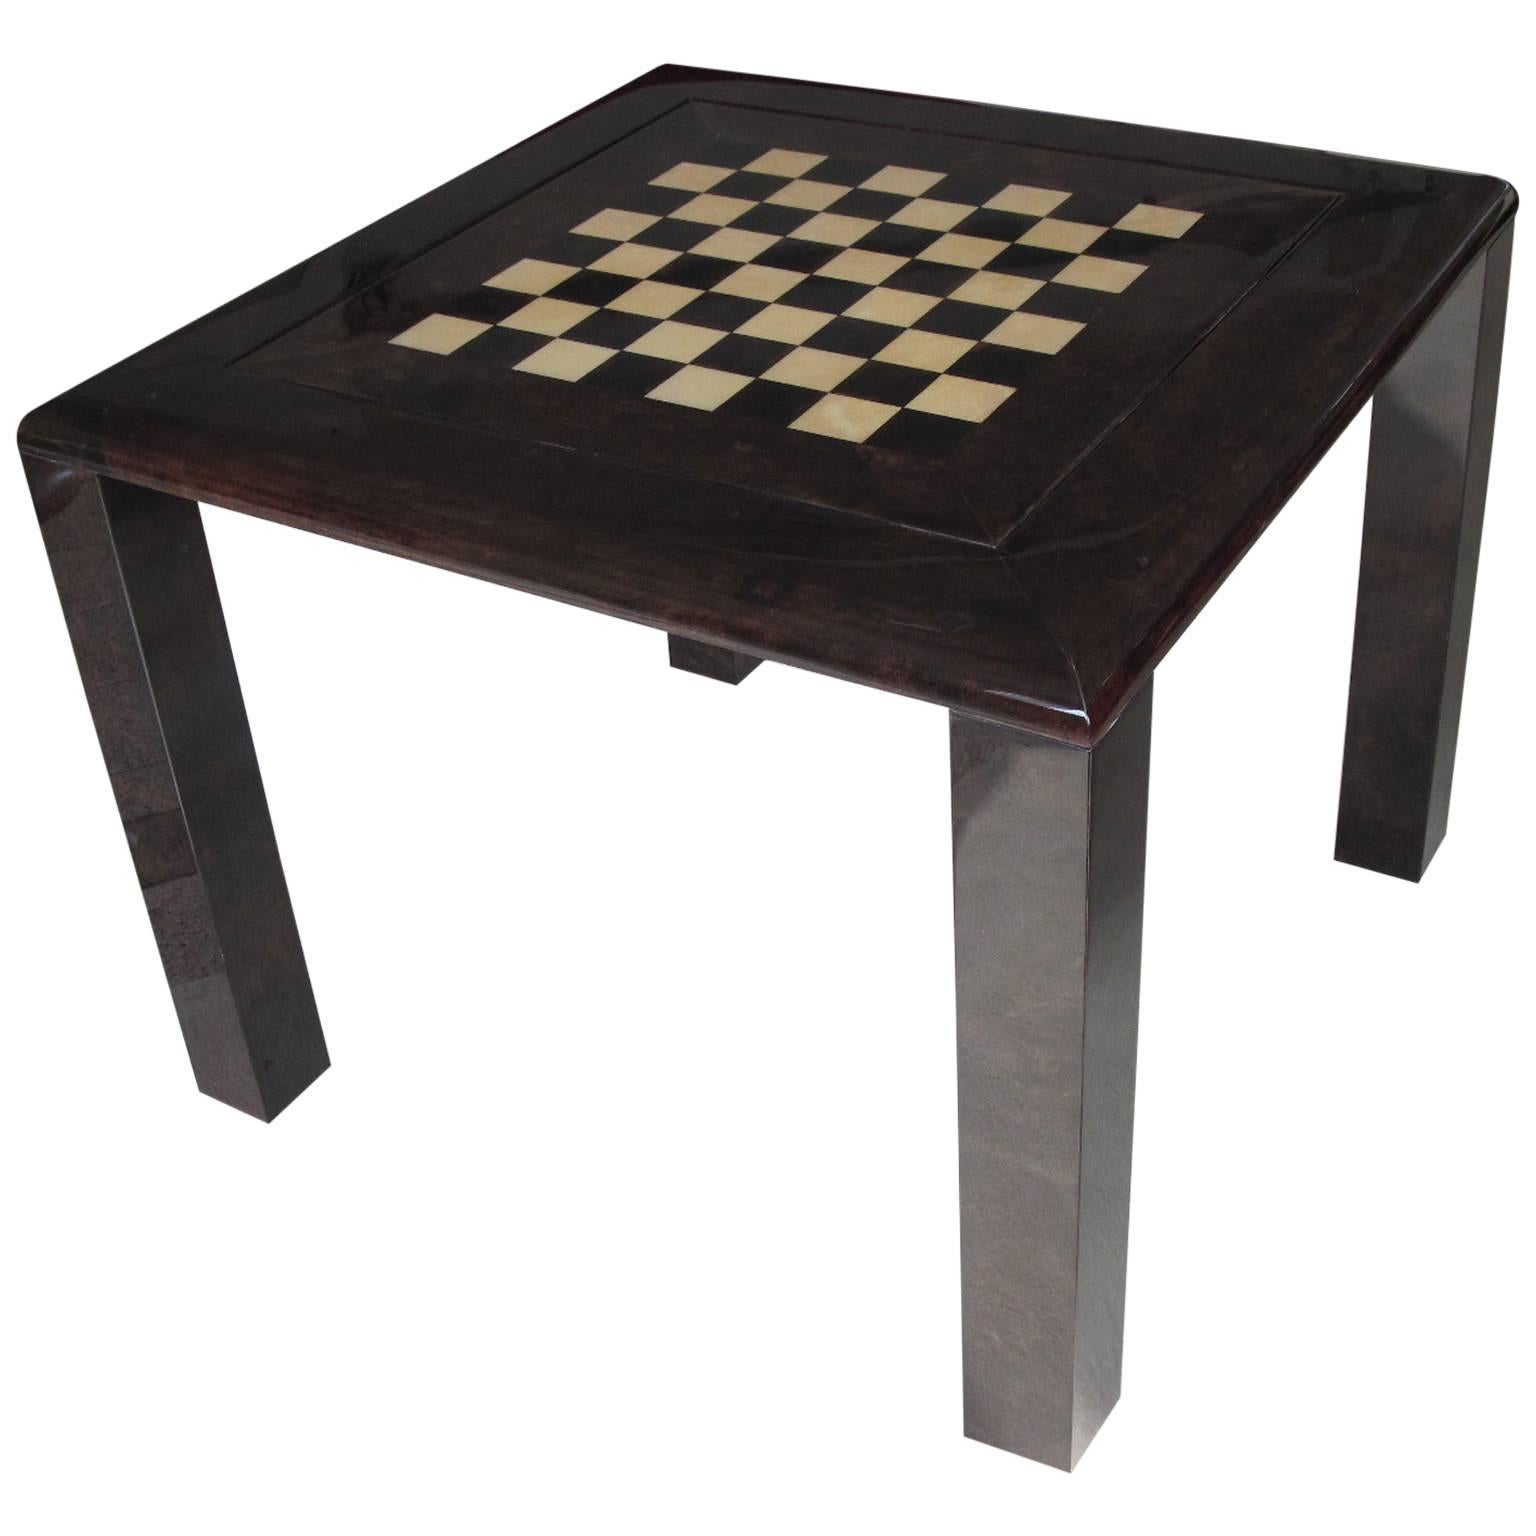 Tura Game Table for Chess and Cards Game For Sale